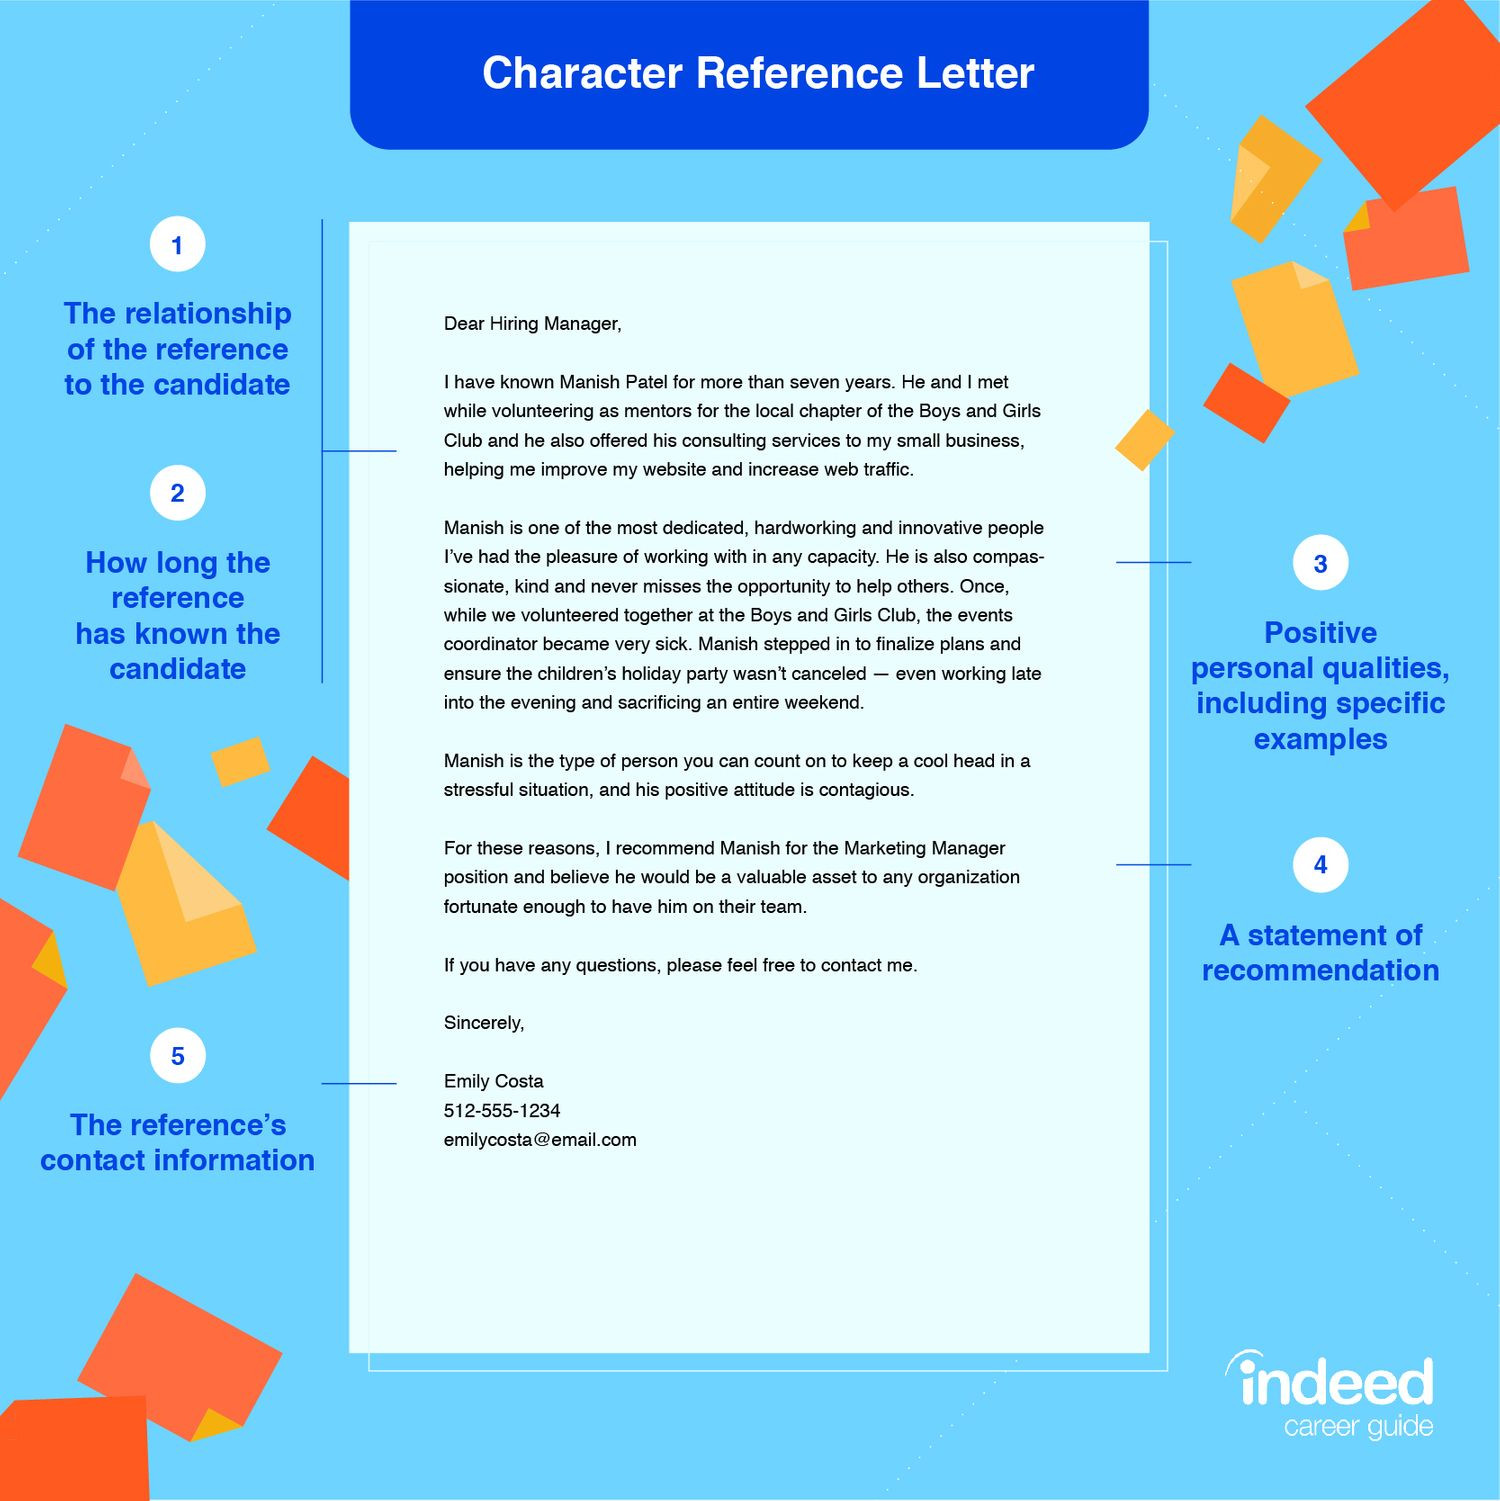 Sample Resume Job Description for soccer Referee Character Reference Letter Sample and Tips Indeed.com